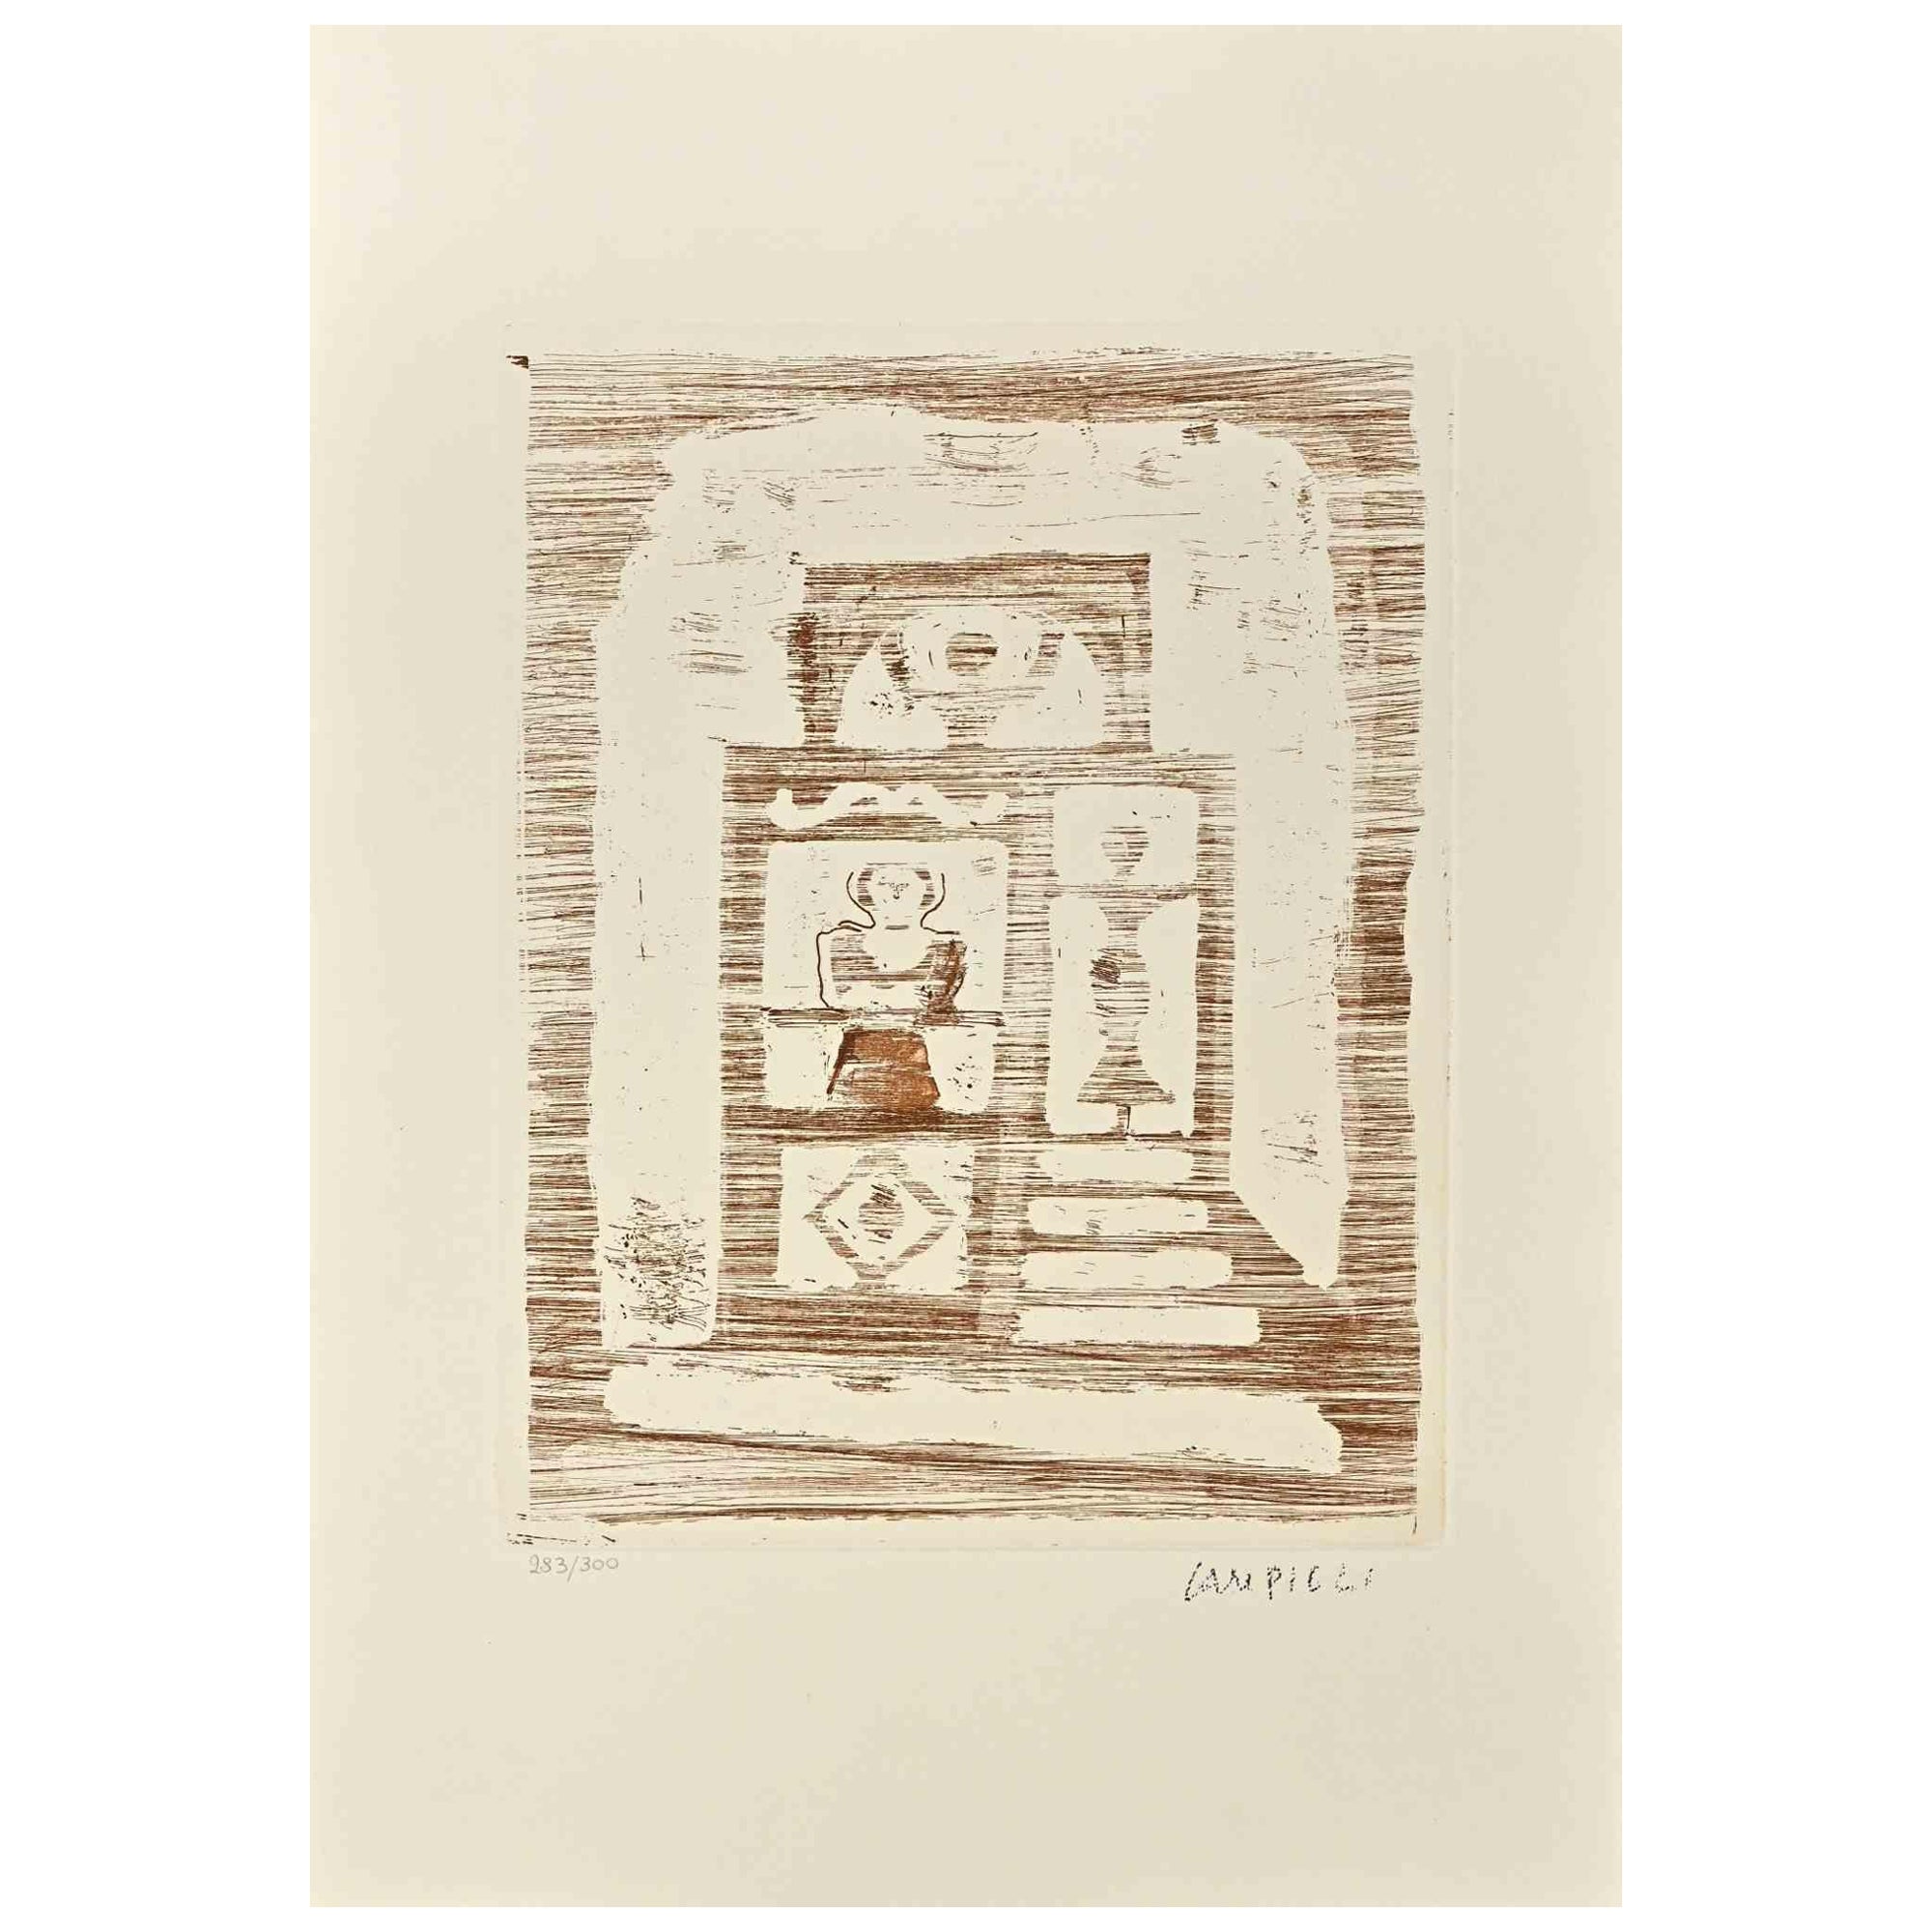 The House of Women  is an original print realized after Massimo Campigli in the 1970s.

Etching on paper.

This artwork it is part of a series of works created in the last period of the artist and printed at the turn of the year of his death, which